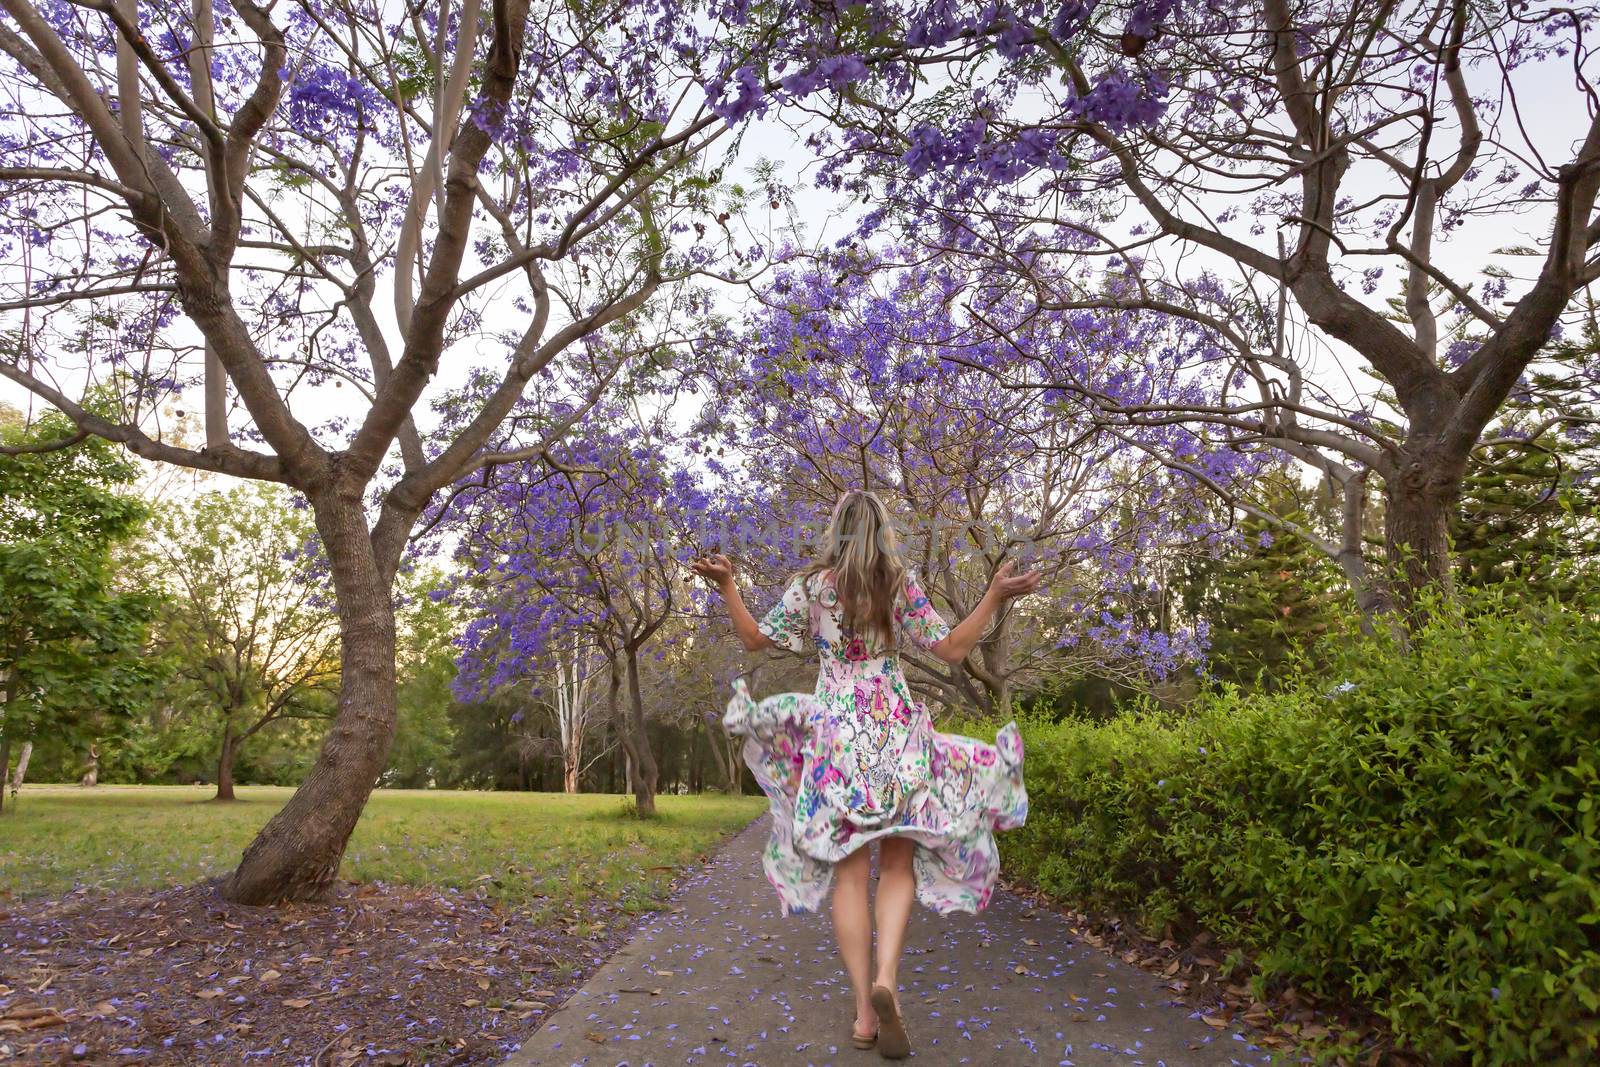 A joyful woman walks under a canopy of flowering Jacaranda trees in spring.  
Note: Some motion and movement in dress as she walks